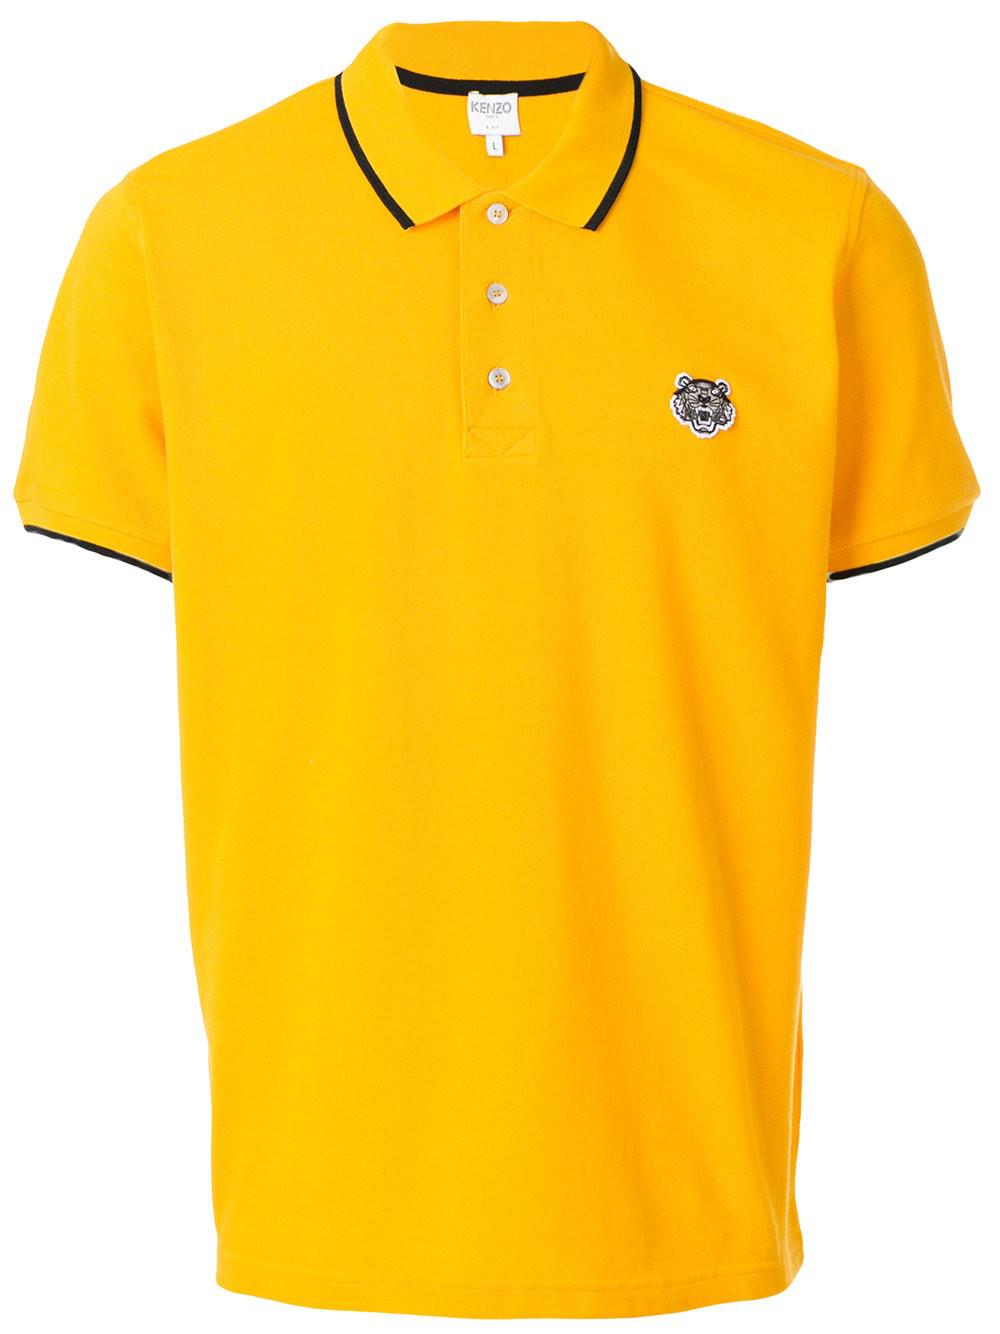 Lyst - Kenzo Tiger Crest Polo Shirt in Yellow for Men